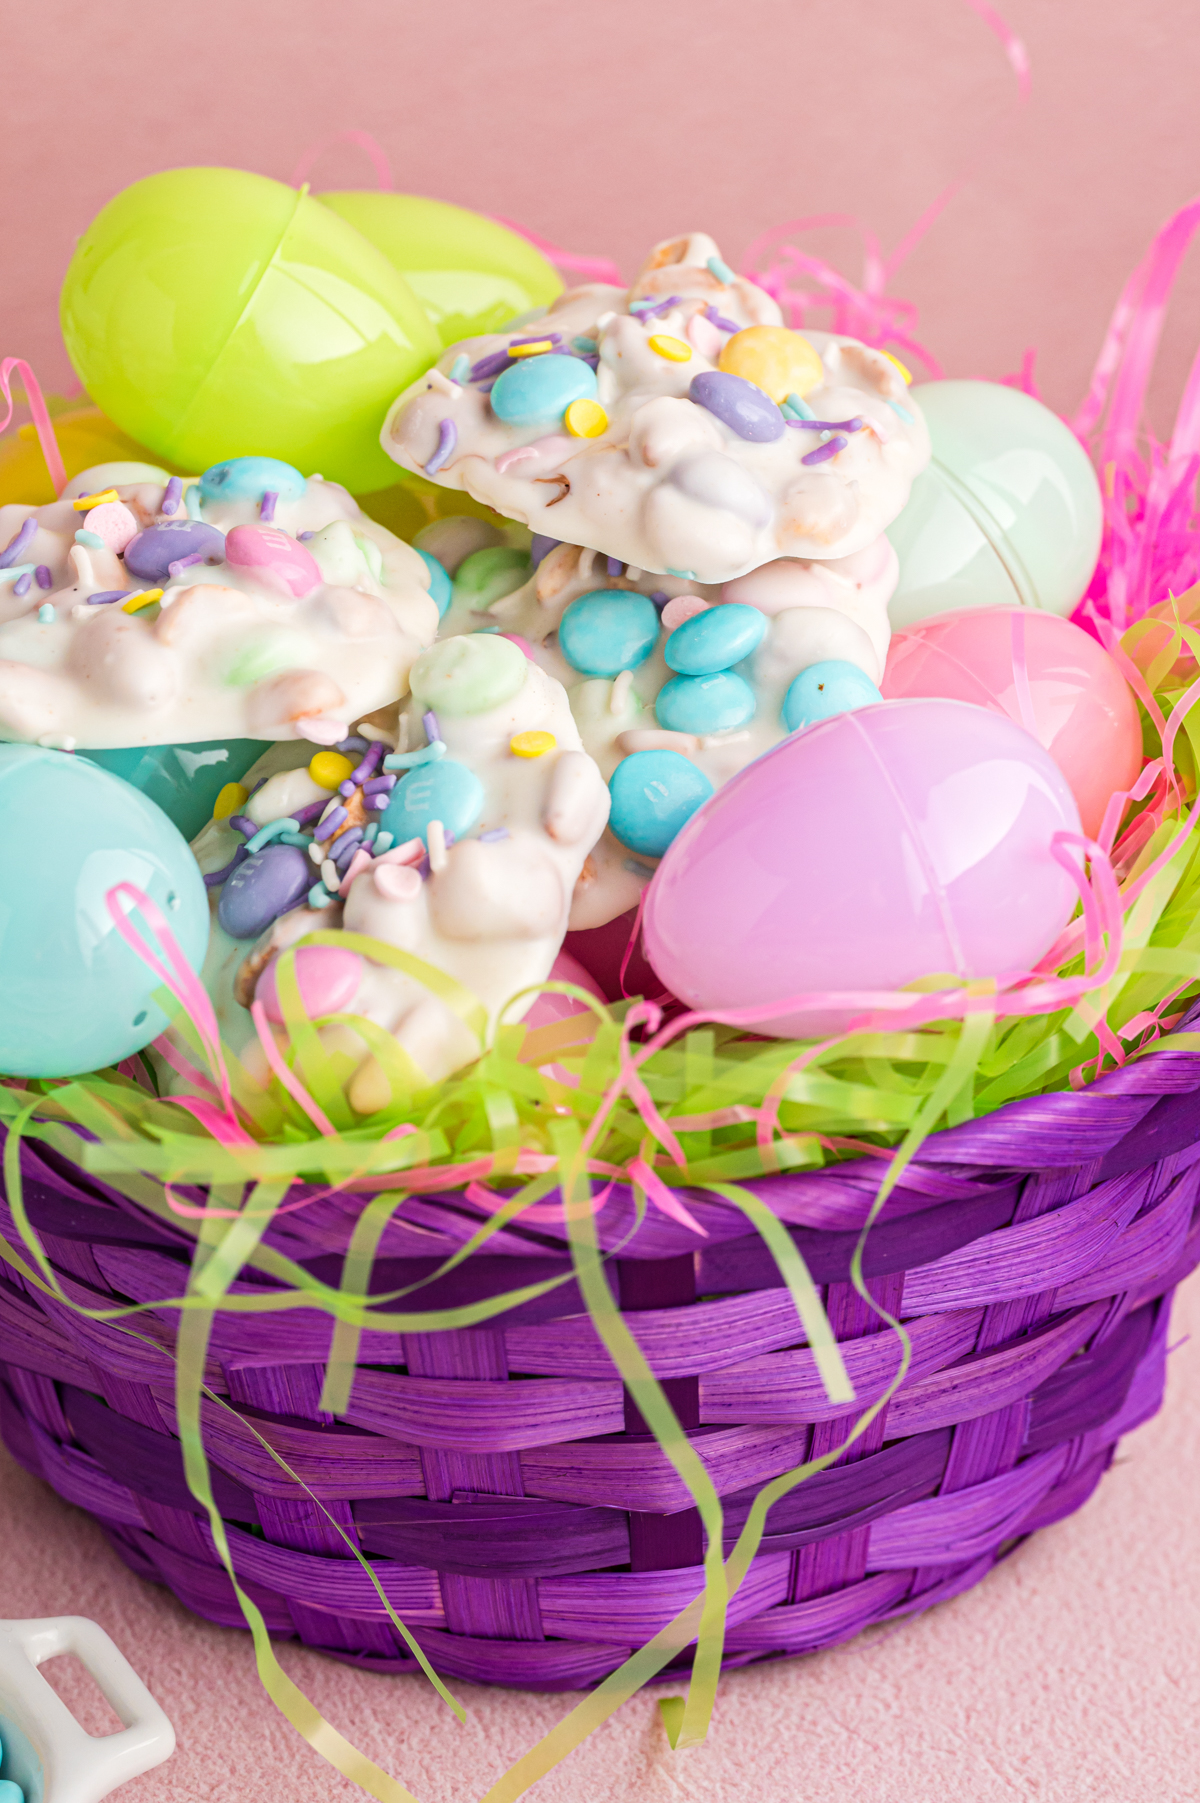 white peanut clusters in an easter basket.